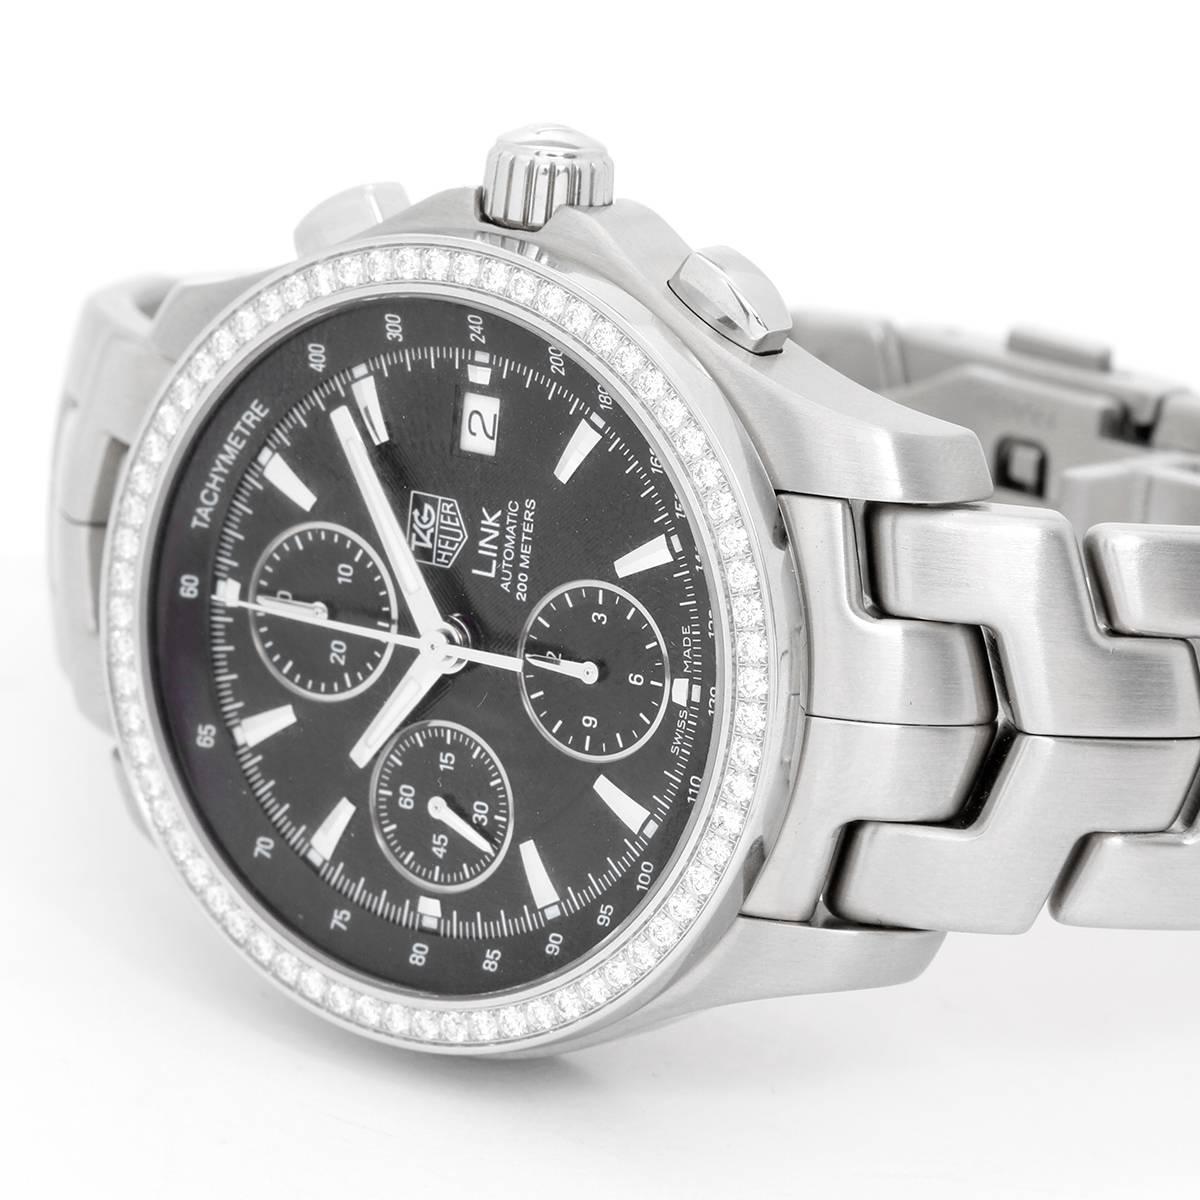 TAG Heuer Link Chronograph Men's Watch ( CJF2117 ) -  Automatic. Stainless Steel ( 42 mm). Black dial with stick hour markers; Chronograph, Date, Second hand  and Tachymeter. Factory Diamond bezel. Link stainless steel bracelet. Pre-owned with box.